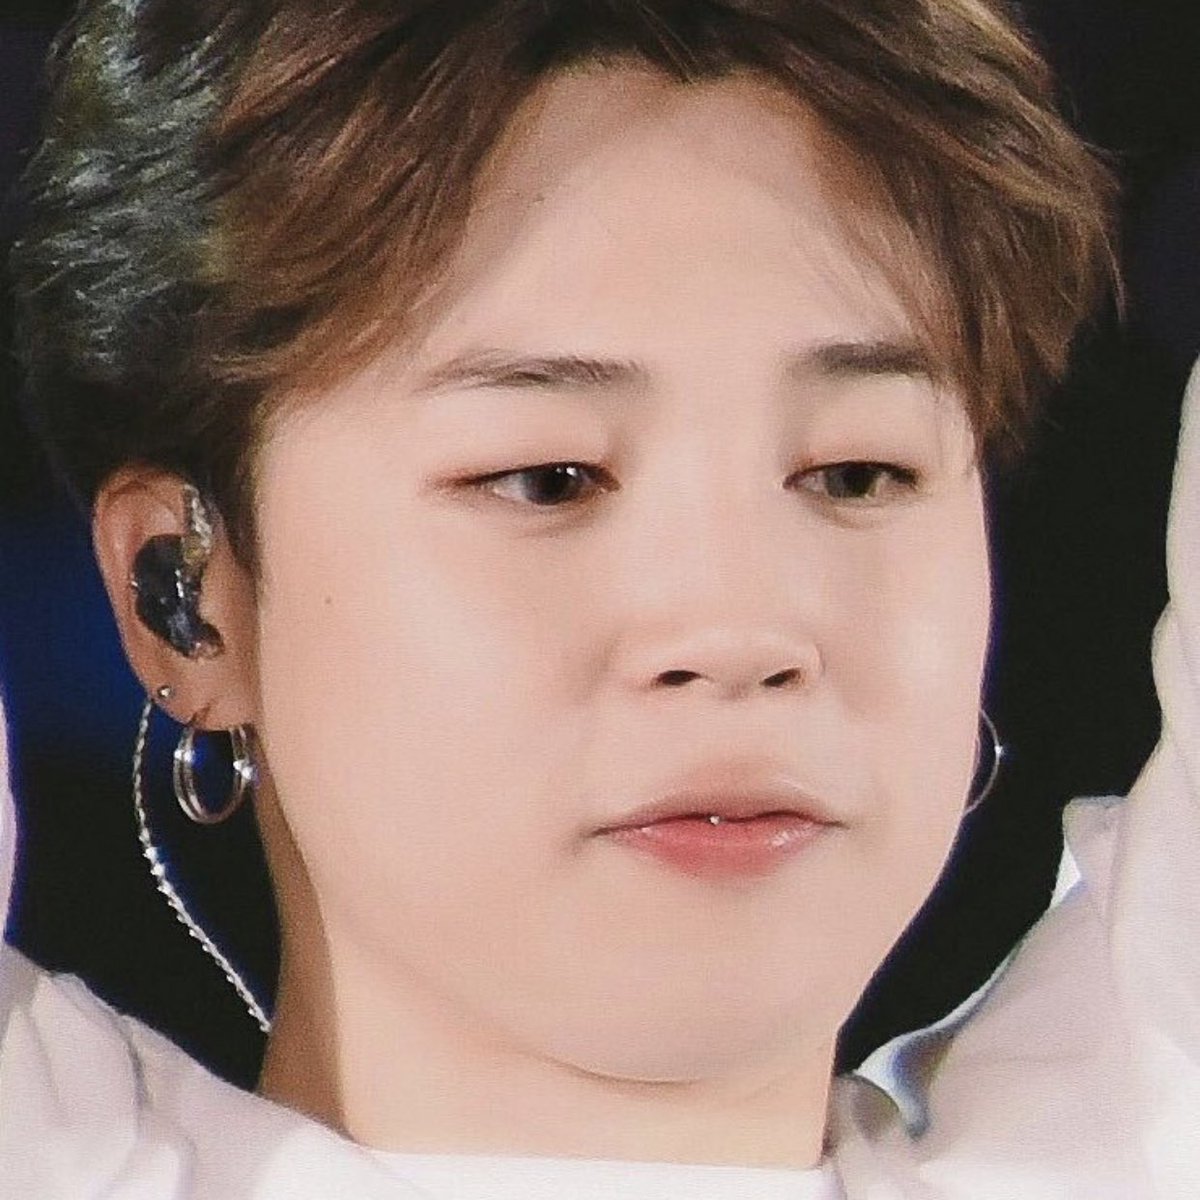 Jimin bring the softest baby, a thread.